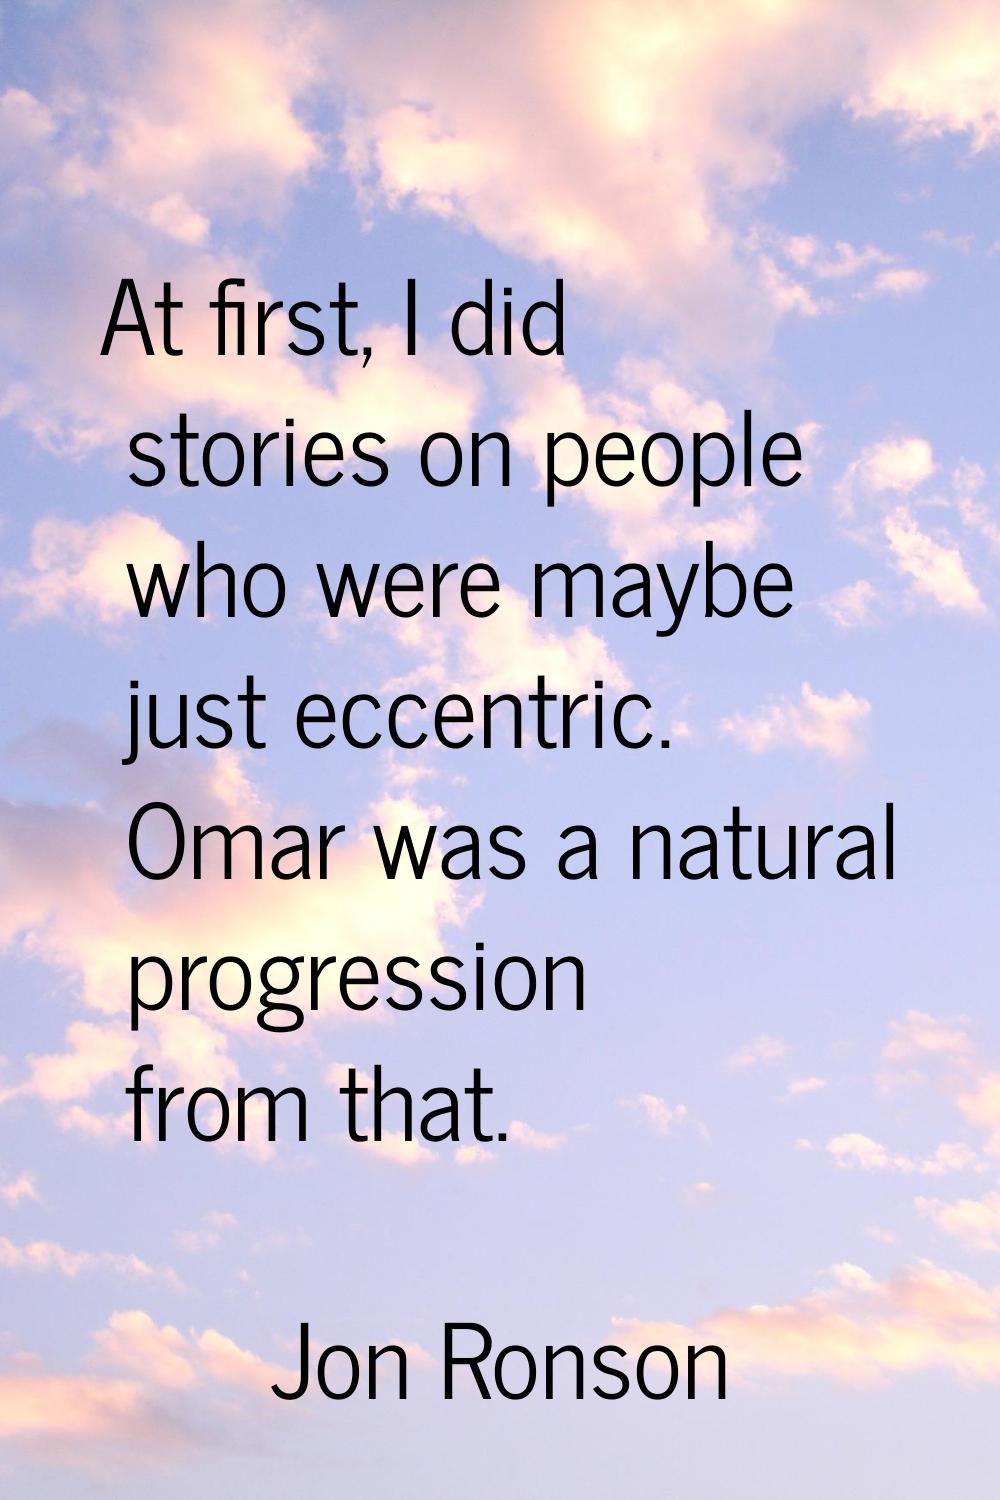 At first, I did stories on people who were maybe just eccentric. Omar was a natural progression fro